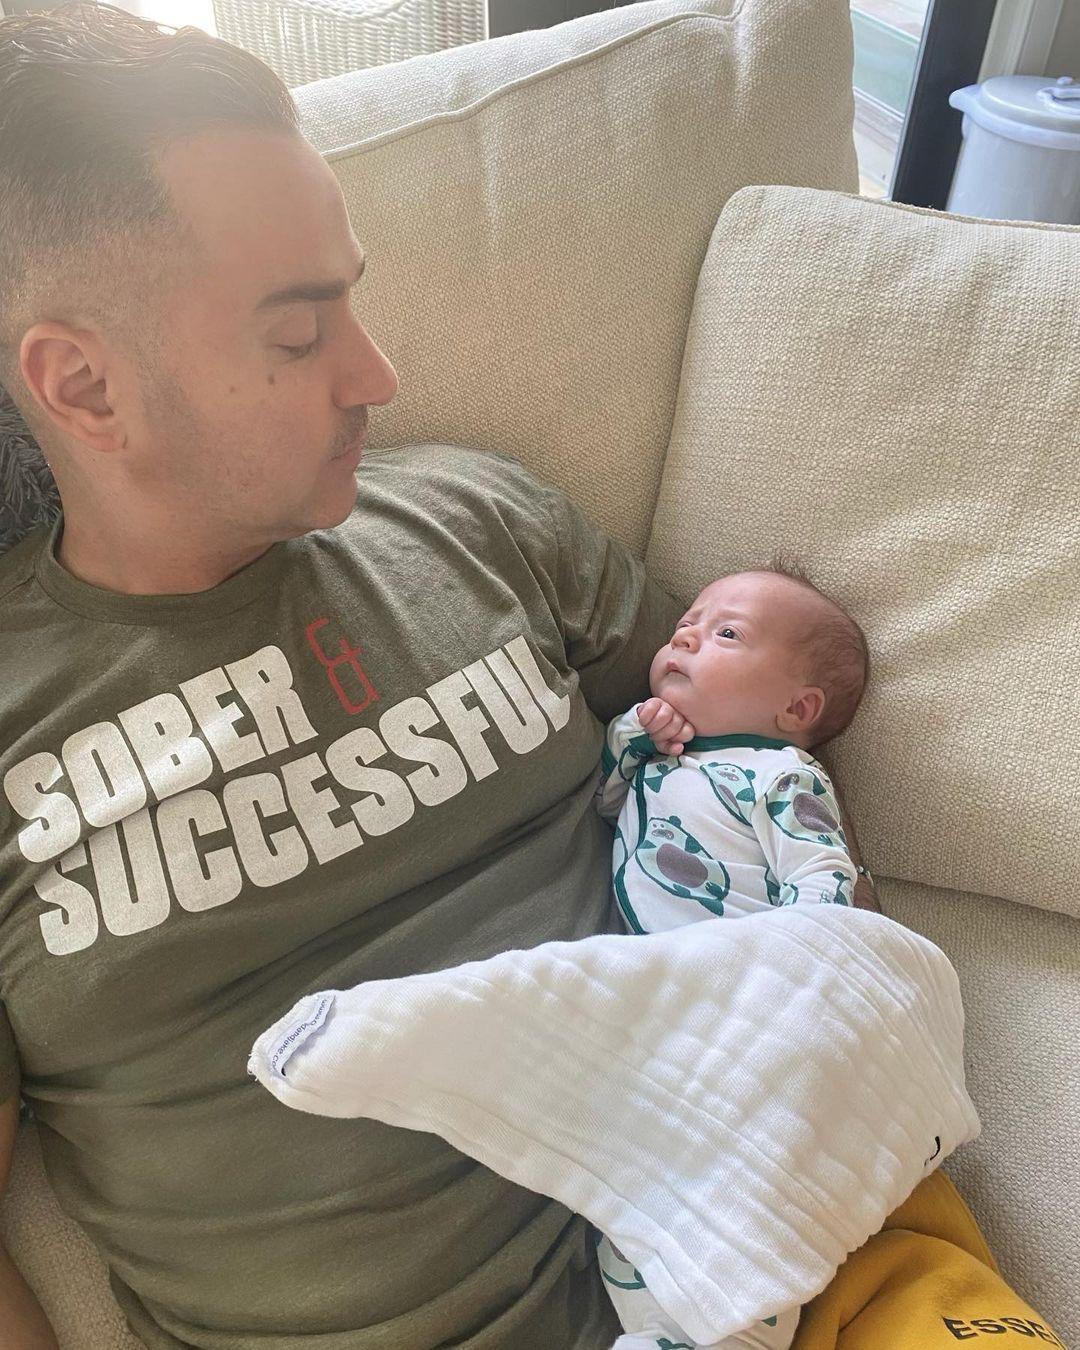 Mike 'The Situation' Sorrentino's birthday pic with his son.